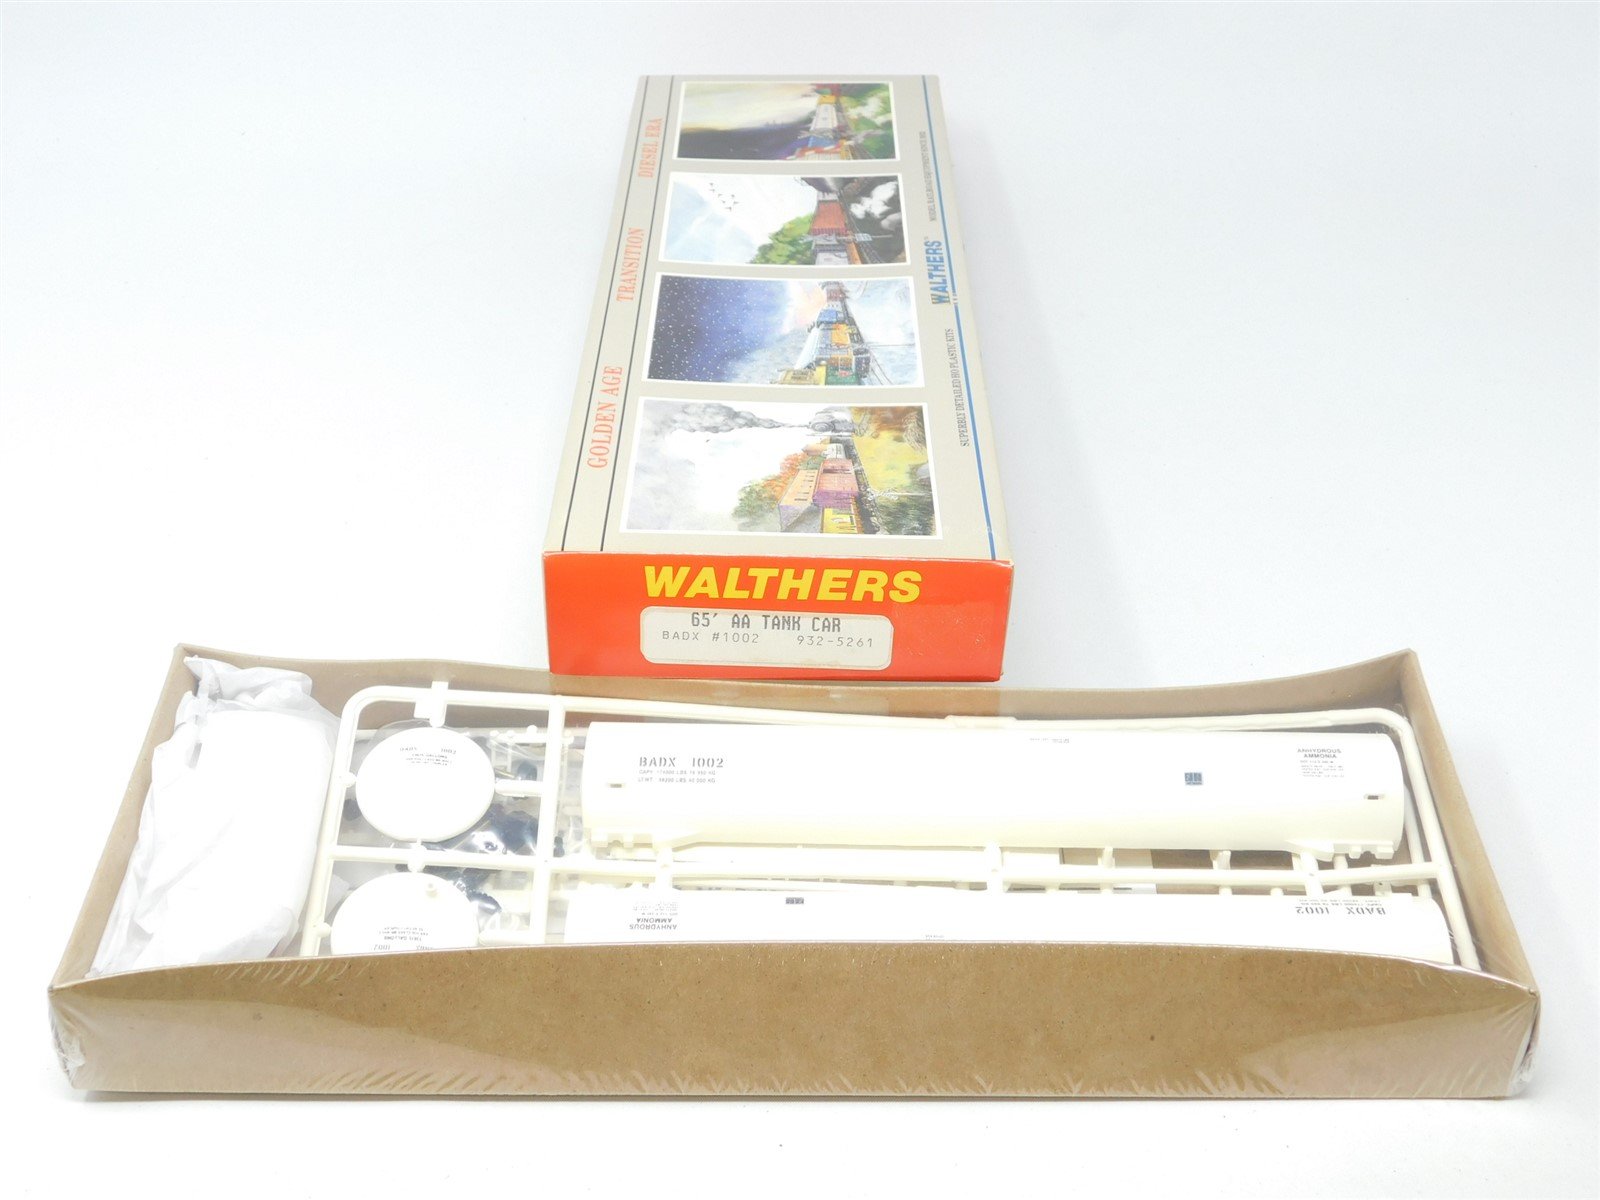 HO Scale Walthers Kit #932-5261 BADX 65' Anhydrous Ammonia Tank Car #1002